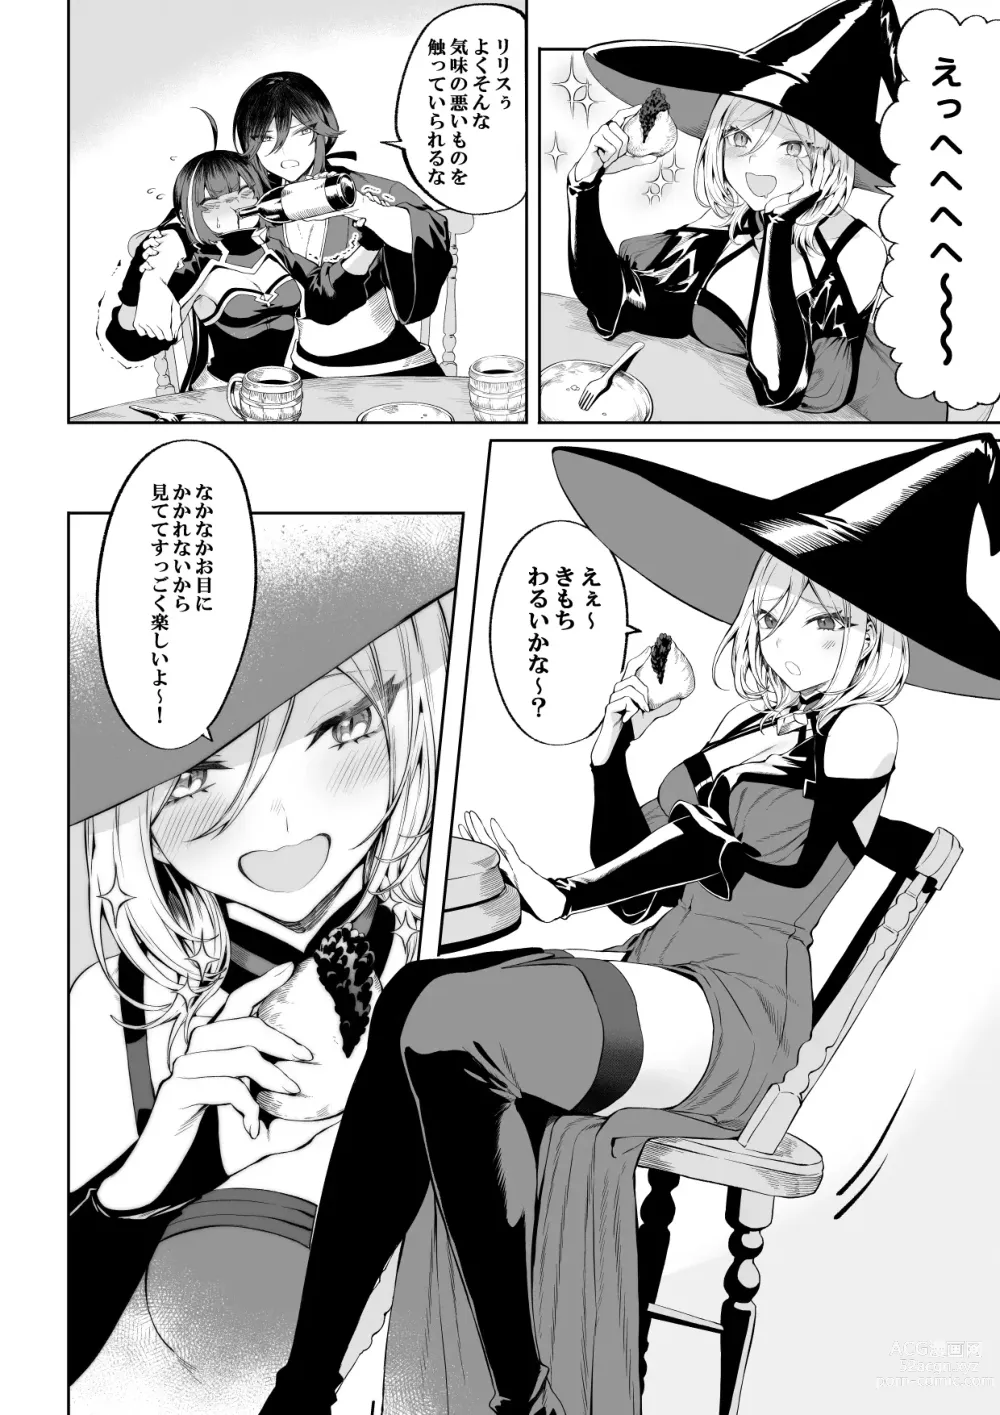 Page 5 of doujinshi 戦乙女といくさごと！〜女魔法使い編〜